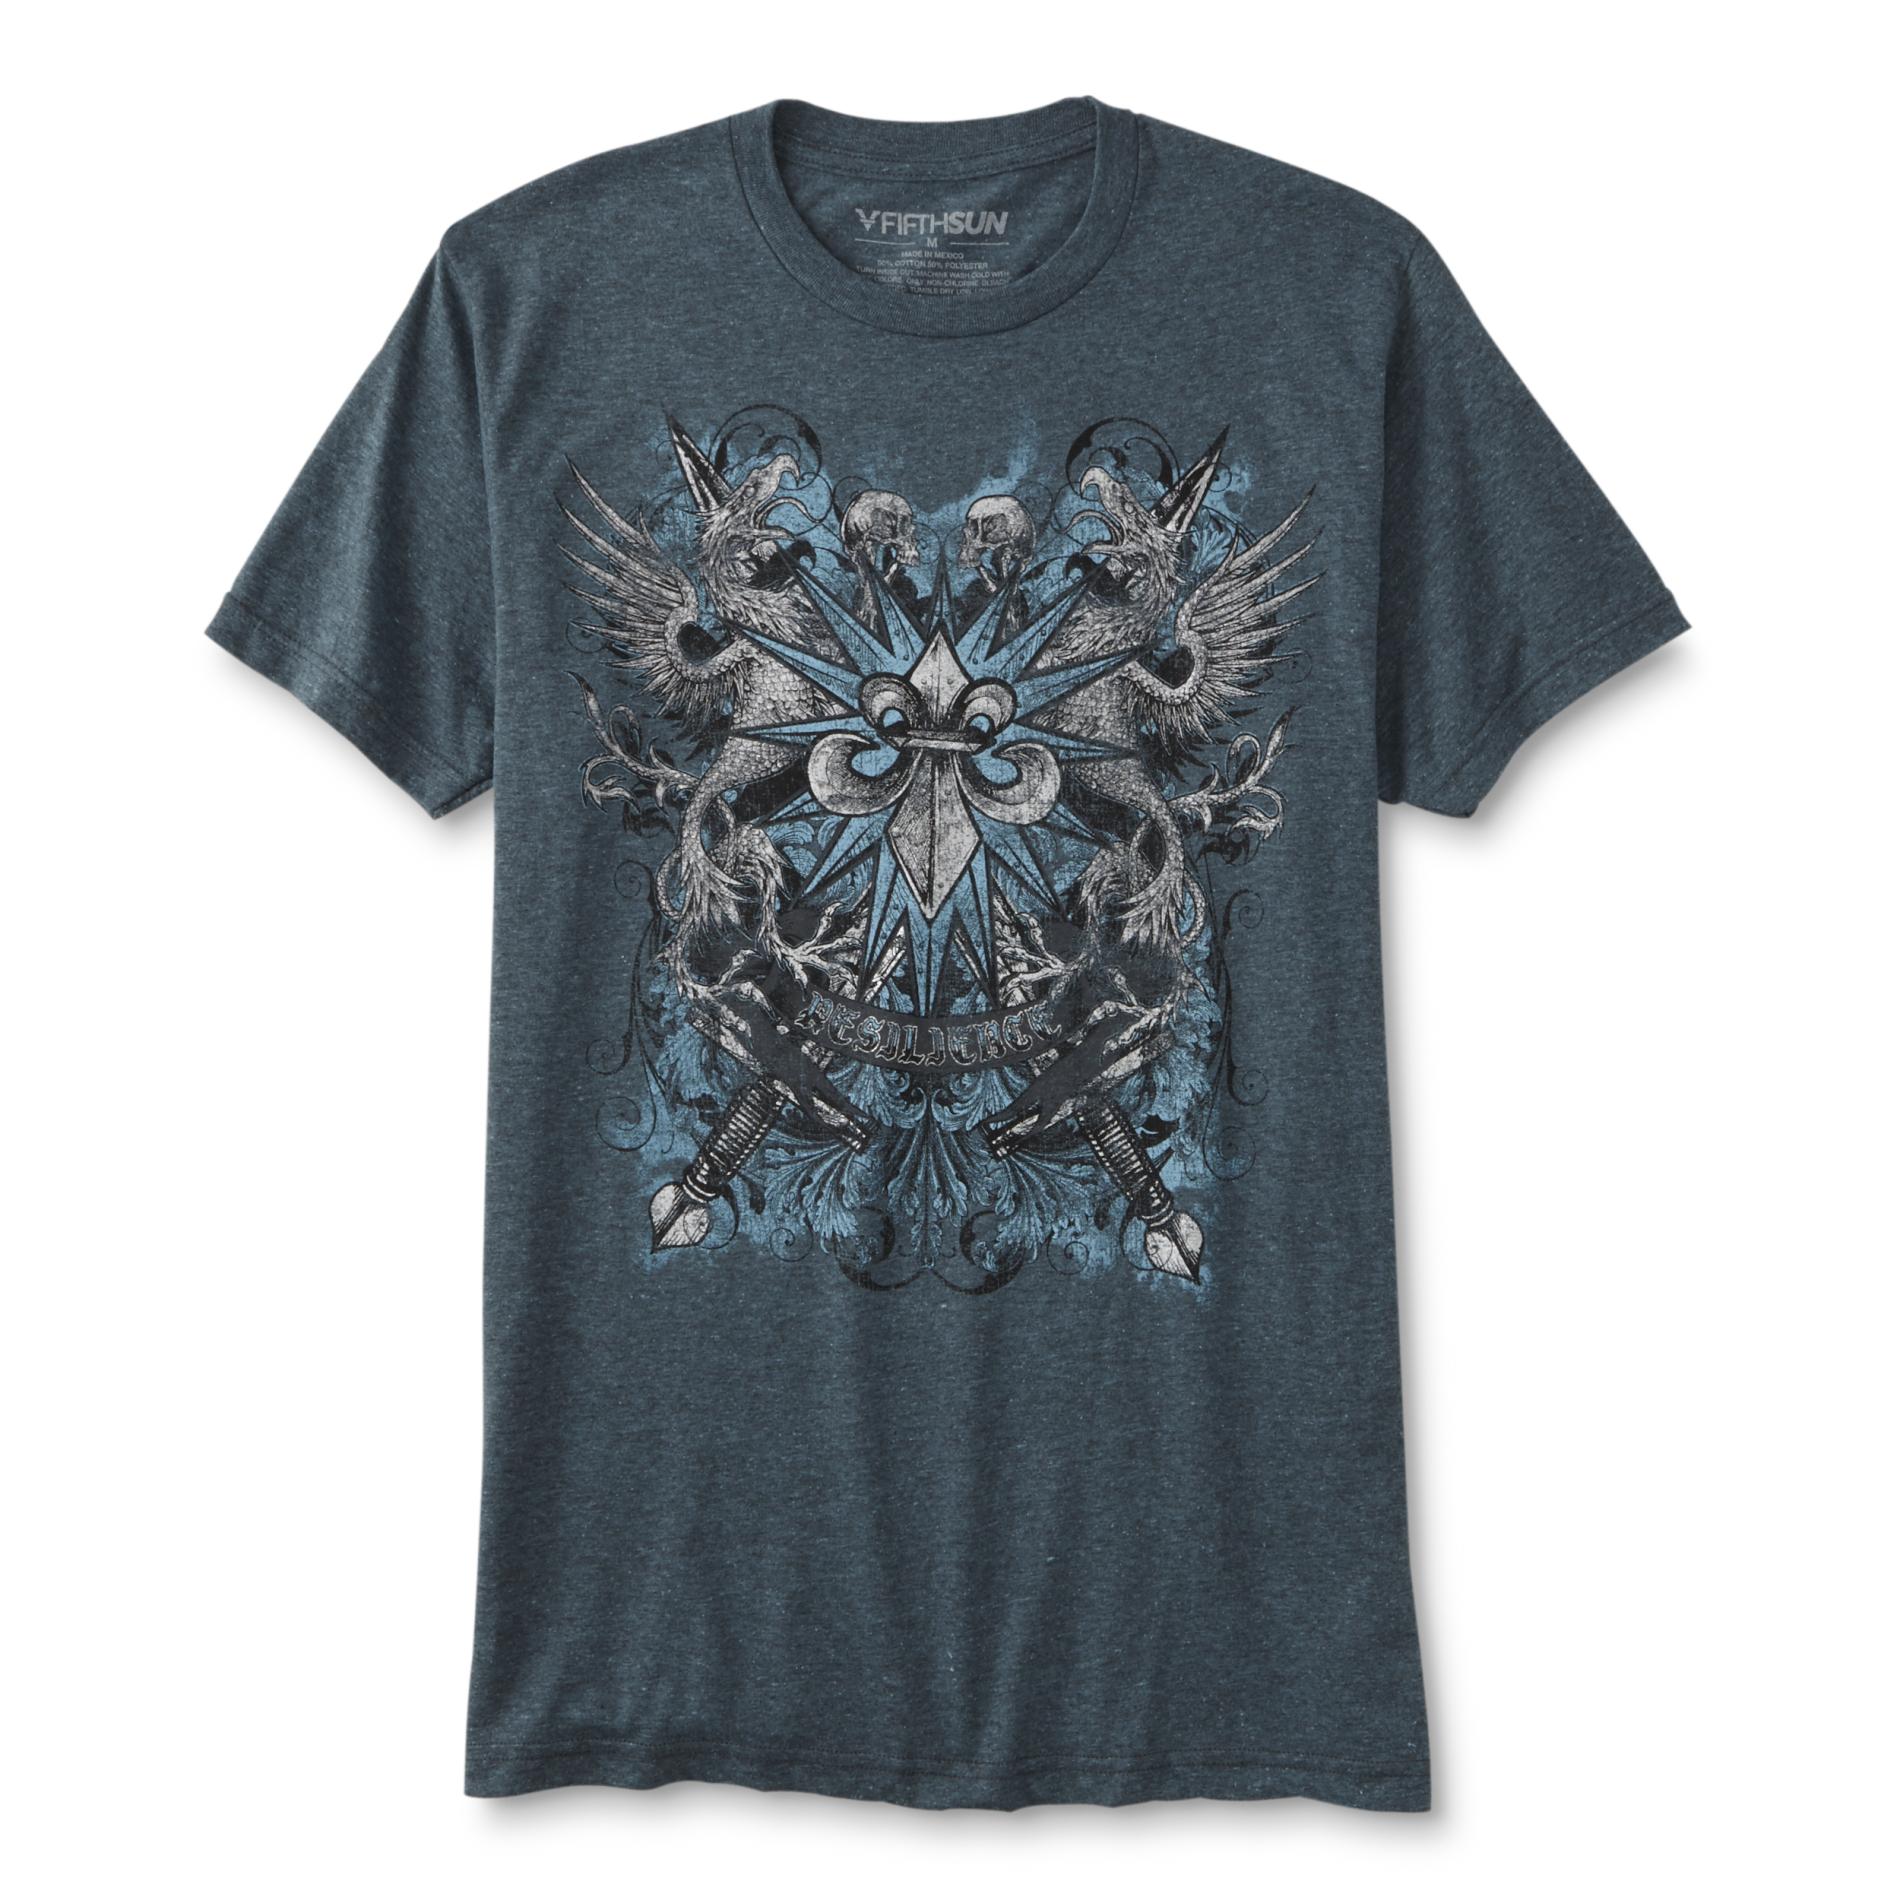 Men's Graphic T-Shirt - Resilience